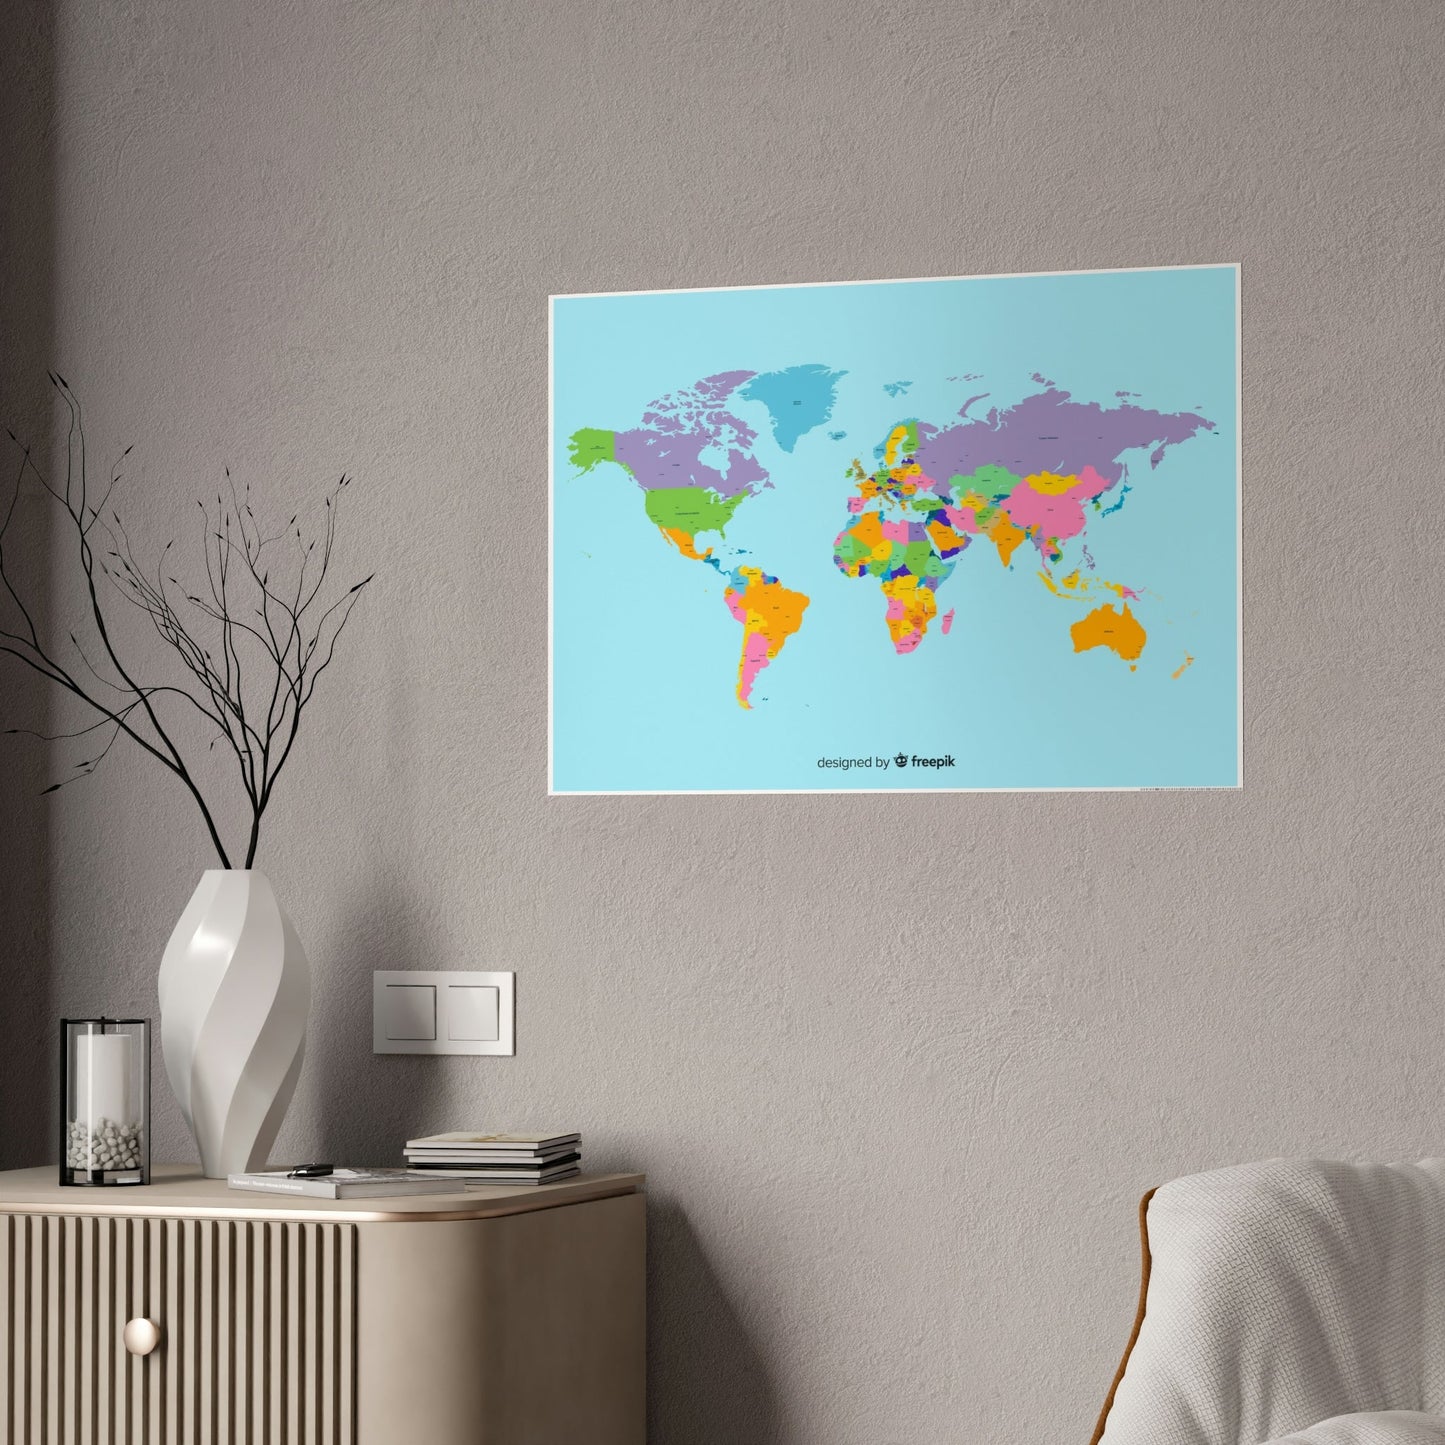 New Perspective on the World: Natural Canvas and Poster Map Art